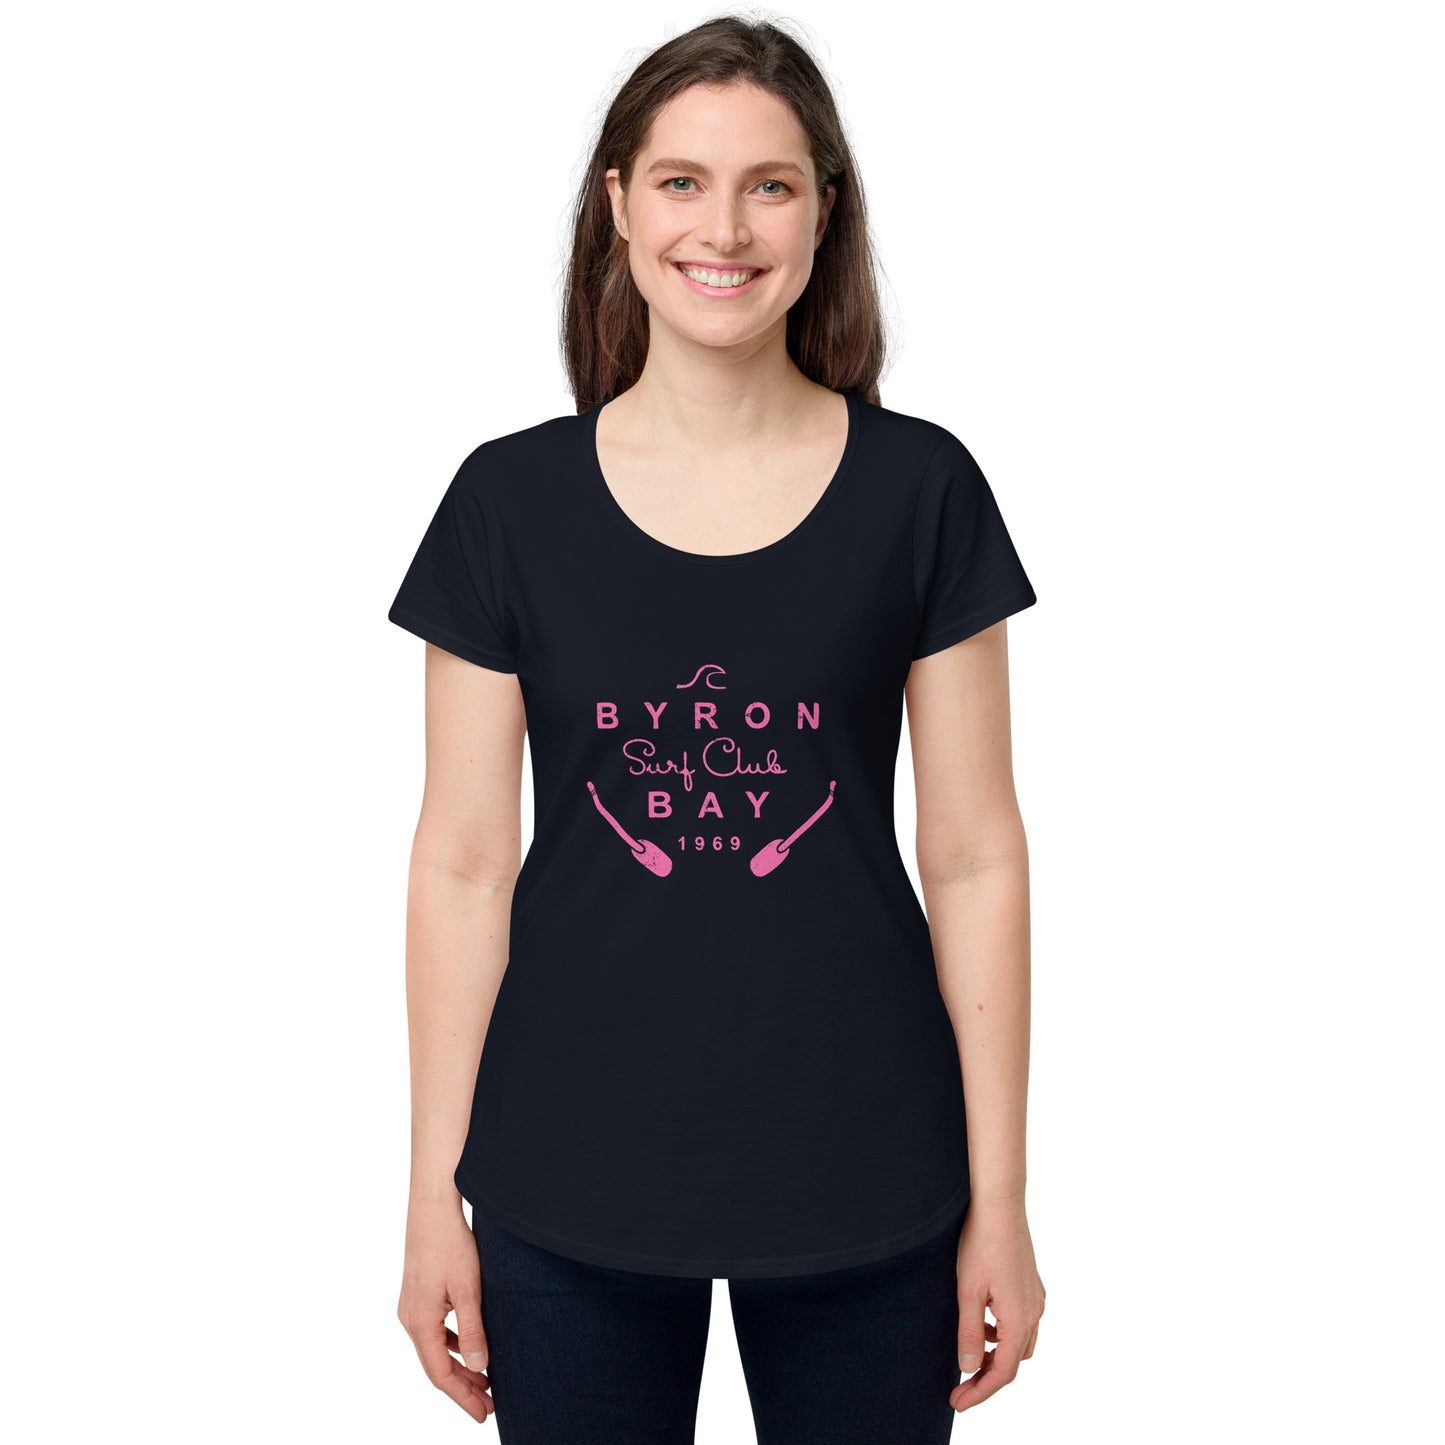  Women’s Round Neck Tee - Navy - Front view, on woman standing with arms by side - pink Byron Bay Surf Club logo on front - Genuine Byron Bay Merchandise | Produced by Go Sea Kayak Byron Bay 